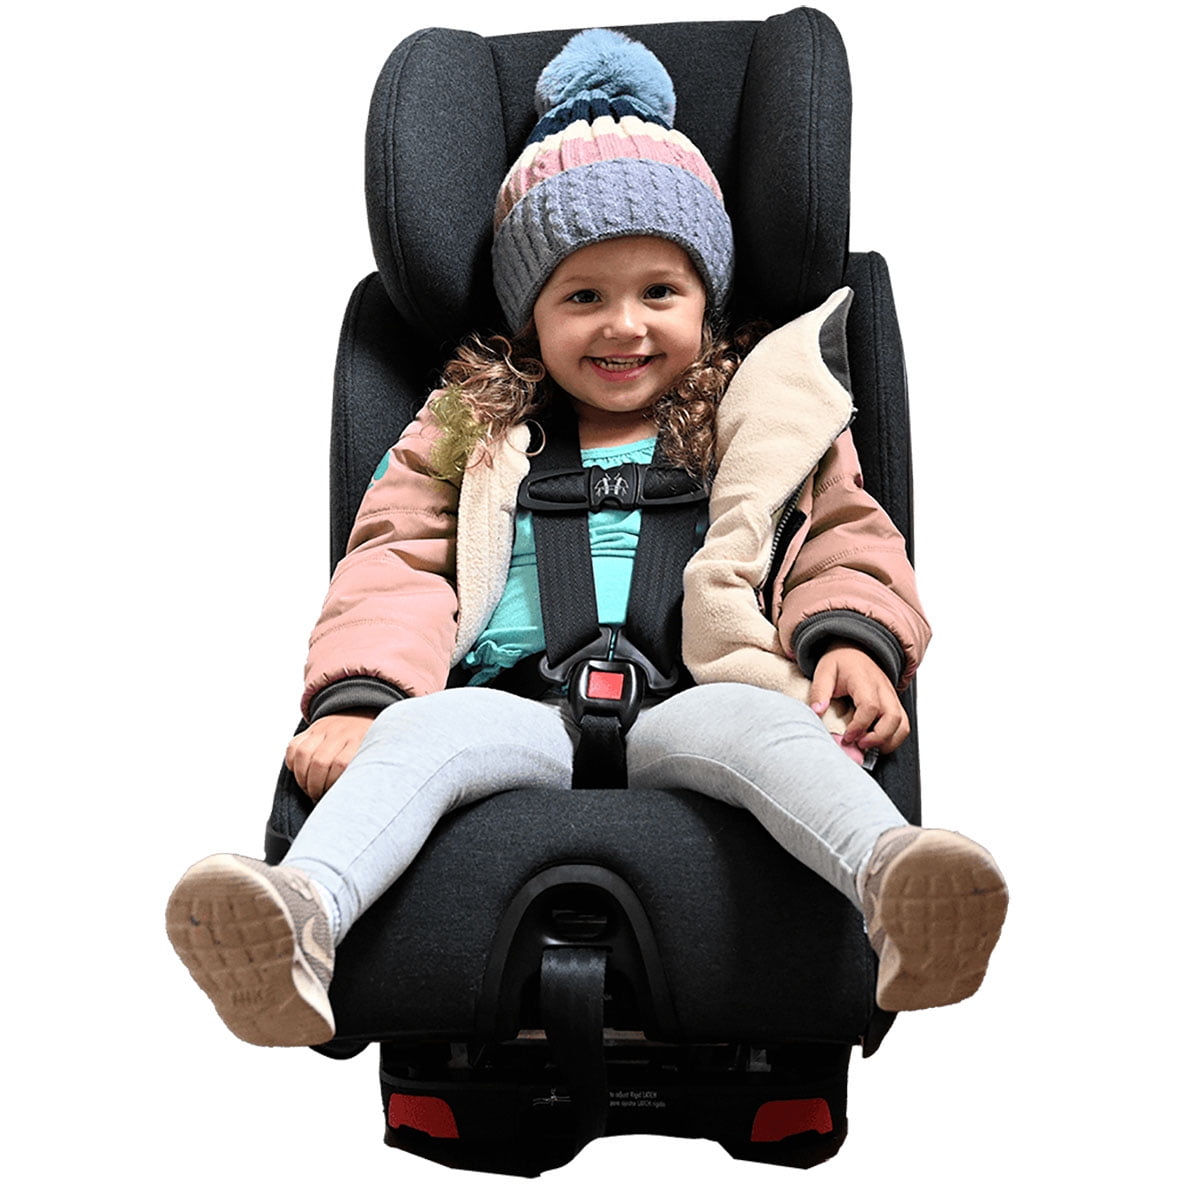  Buckle Me Baby Coats - Safer Car Seat Baby Boys Winter Baby  Jacket/Quick Close Winter Coat- Deepest of Oceans Blue - Size 6-9 Months -  As Seen On Shark Tank: Clothing